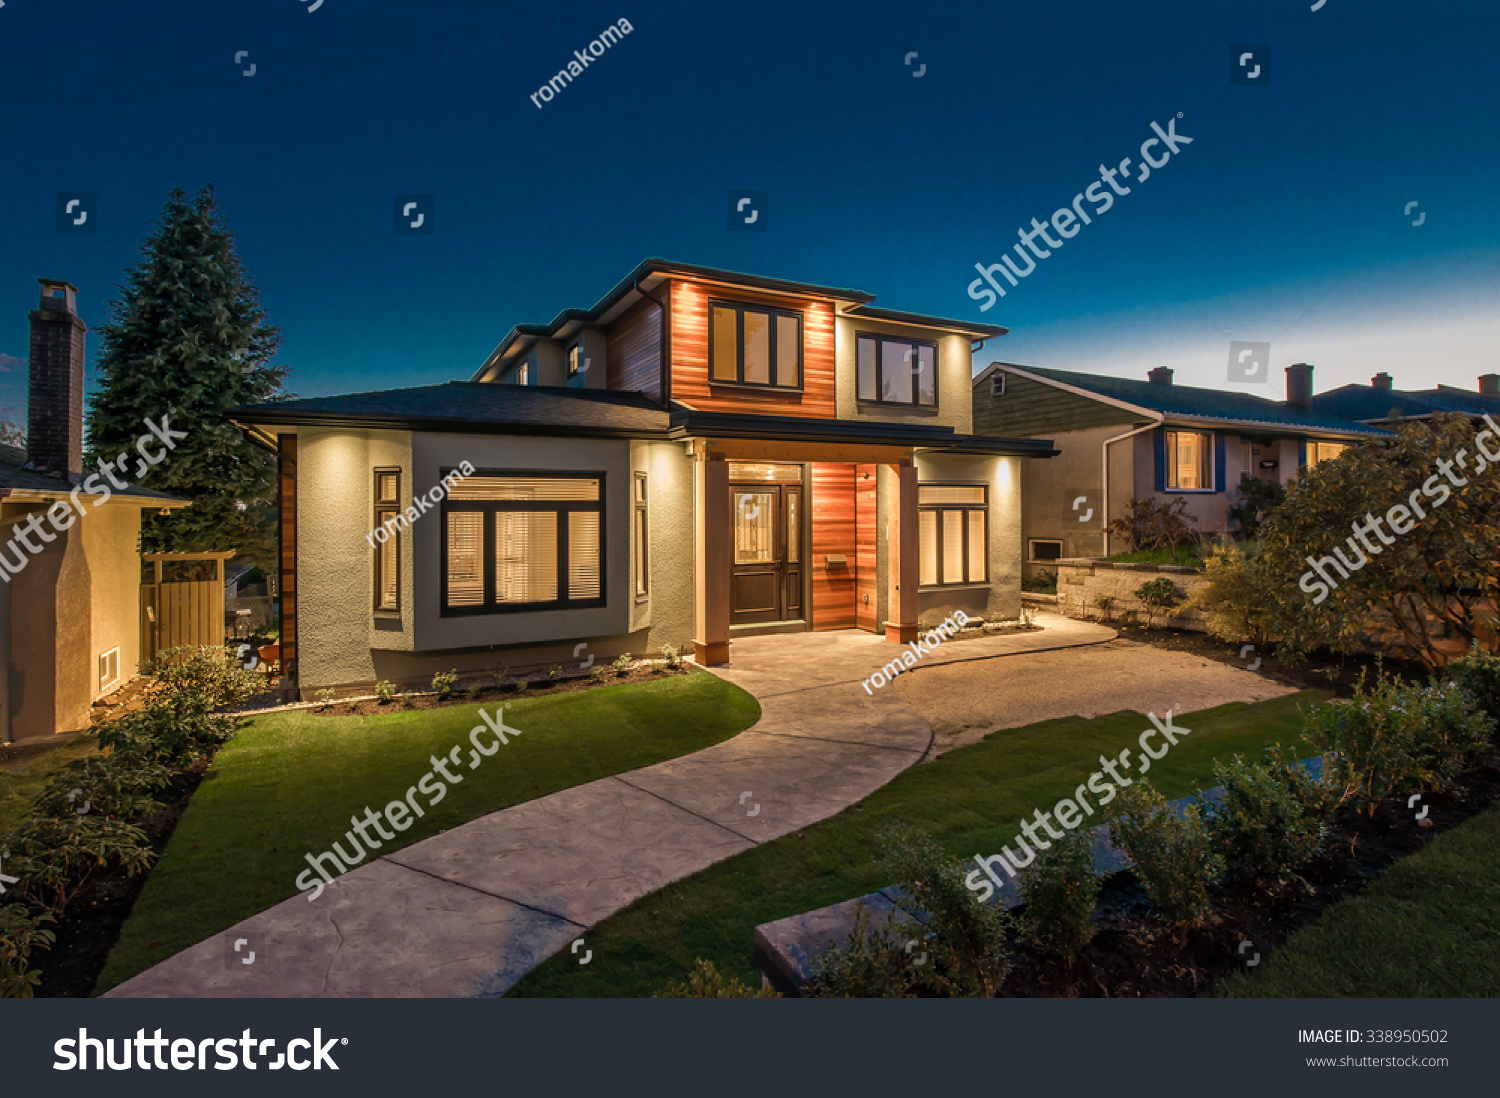 Big luxury, modern house at dusk, night time in suburbs of Vancouver, Canada. #338950502